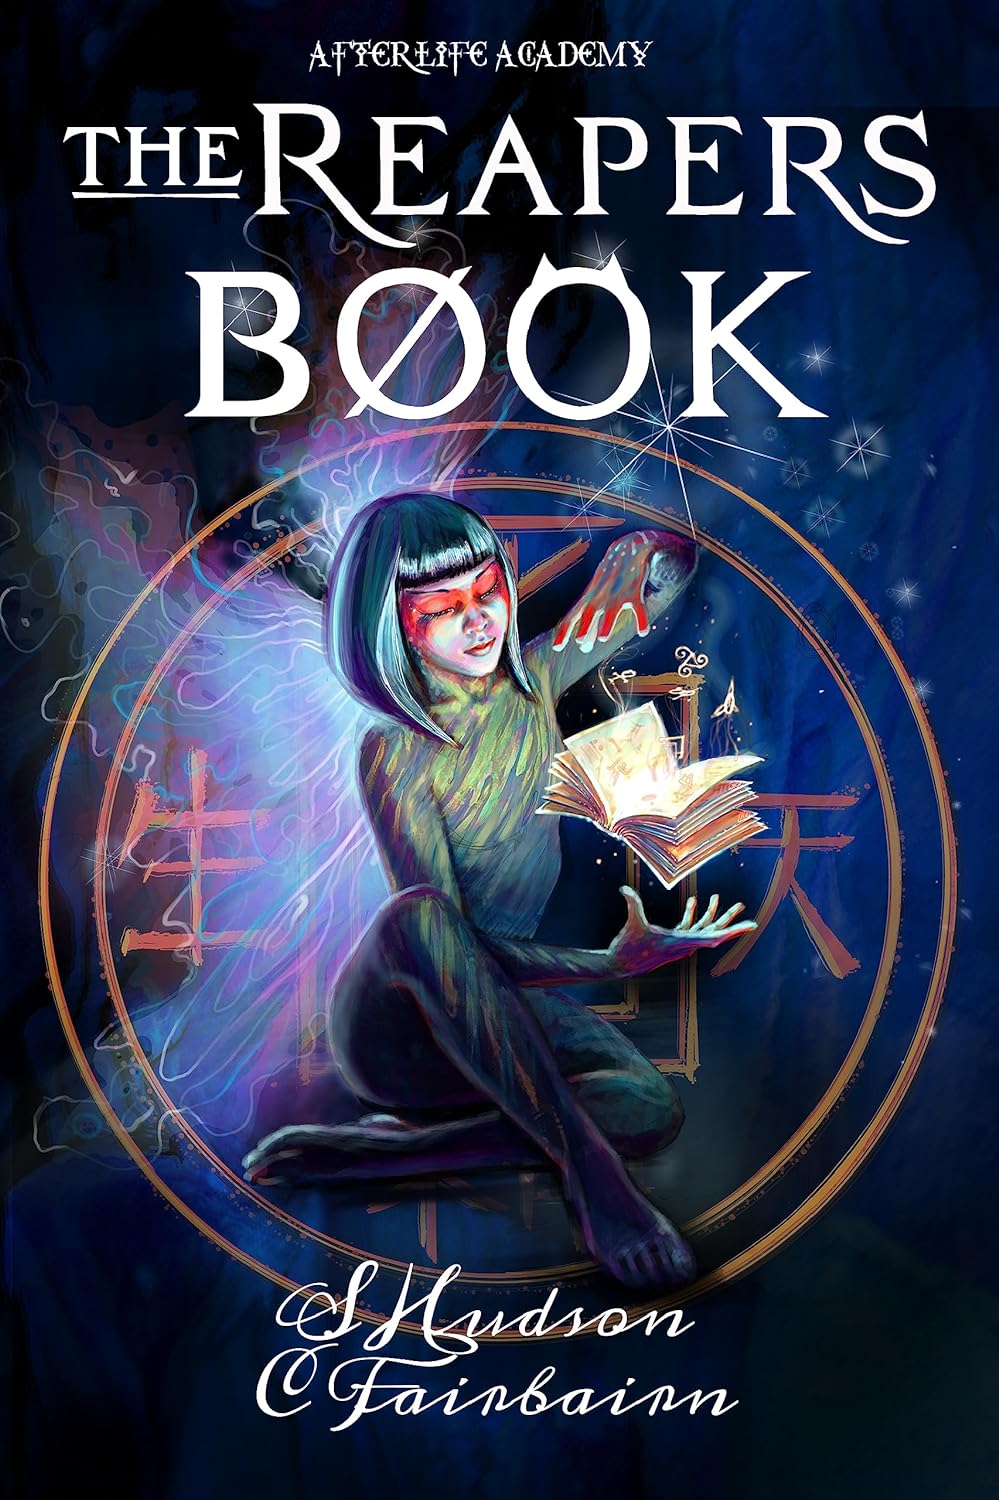 The Reaper’s Book (Afterlife Academy Book 3) by Stephanie Hudson